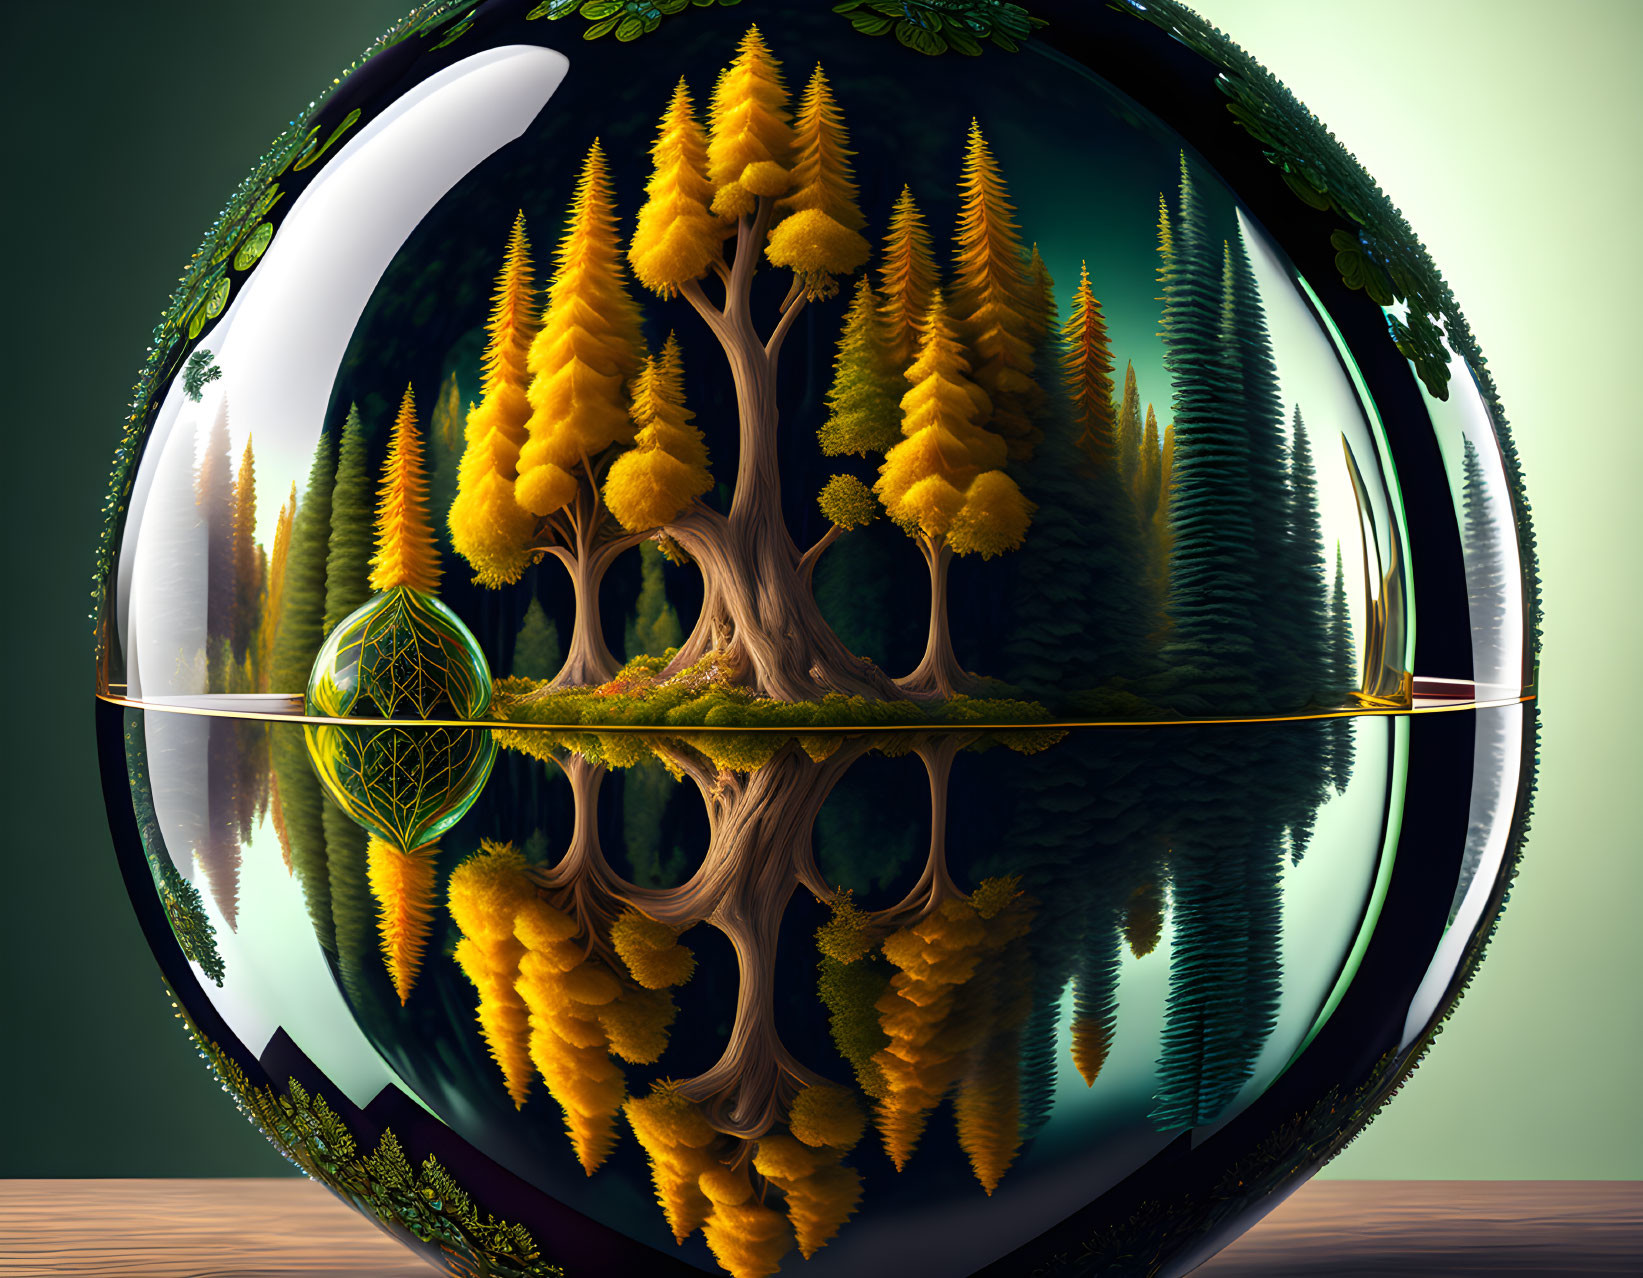 Surreal spherical artwork of mirrored forest with golden trees on wooden surface